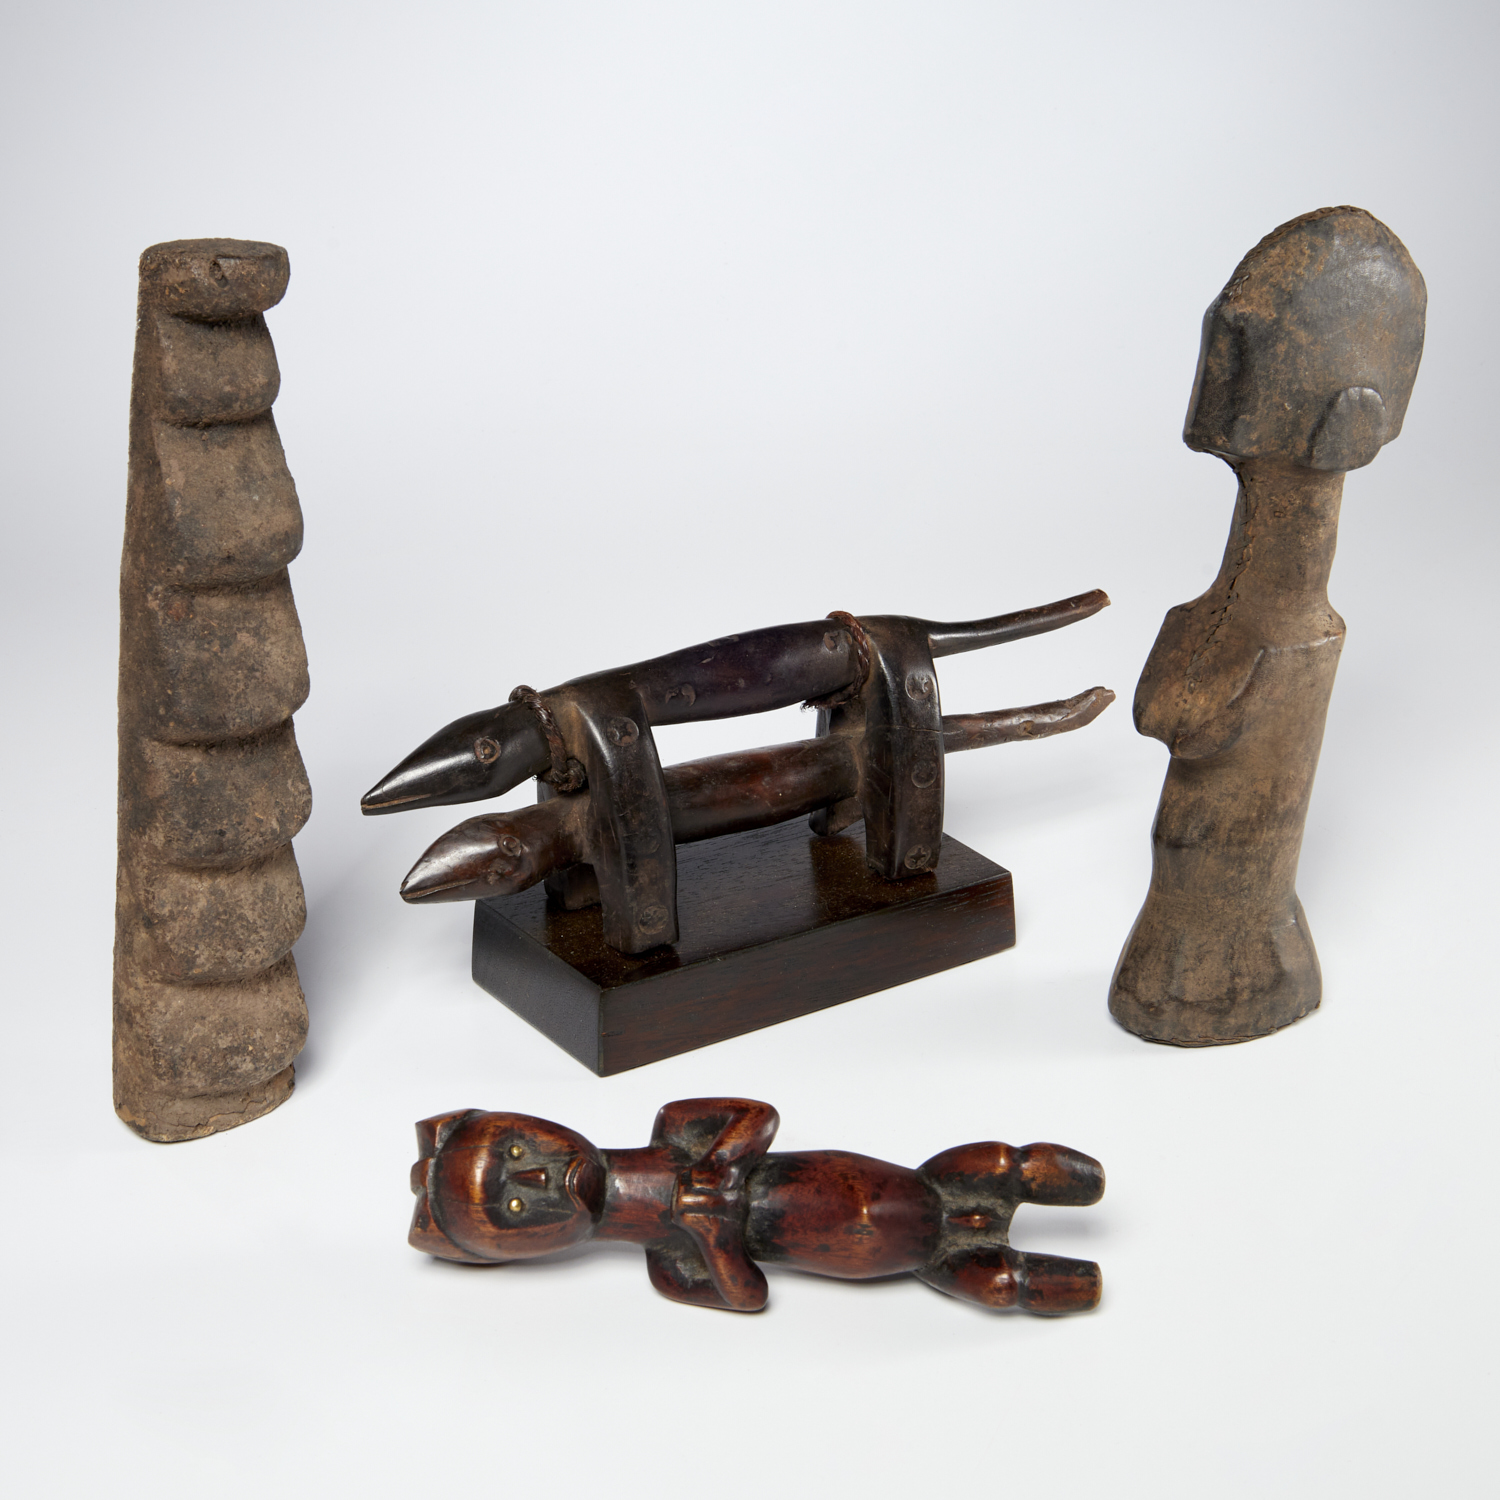 GROUP 4 AFRICAN CARVED WOOD OBJECTS 30bdd7